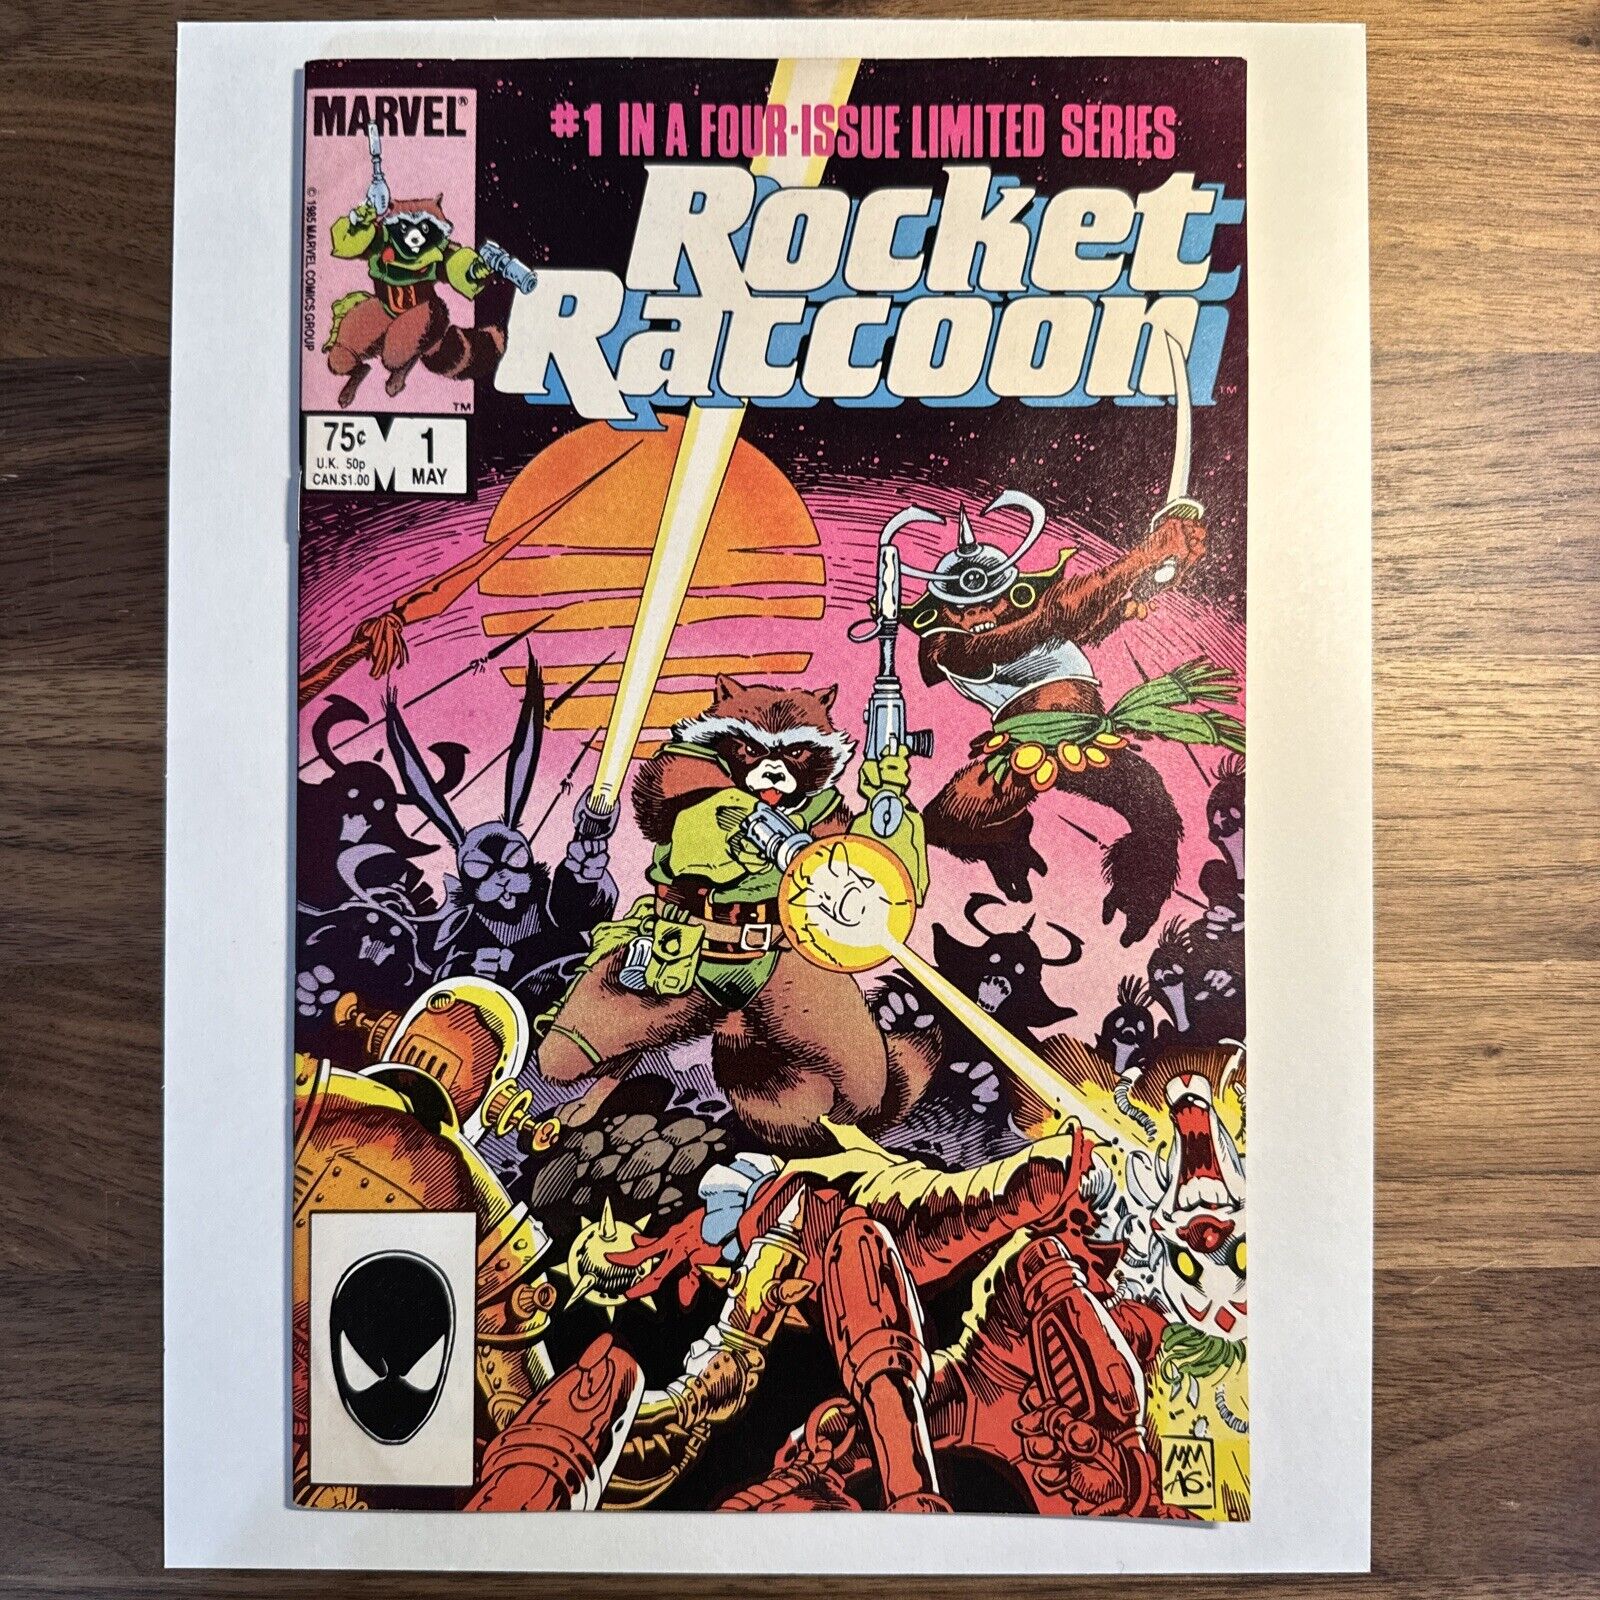 Rocket Raccoon #1 Limited Series 1985 First self-titled series -staining-